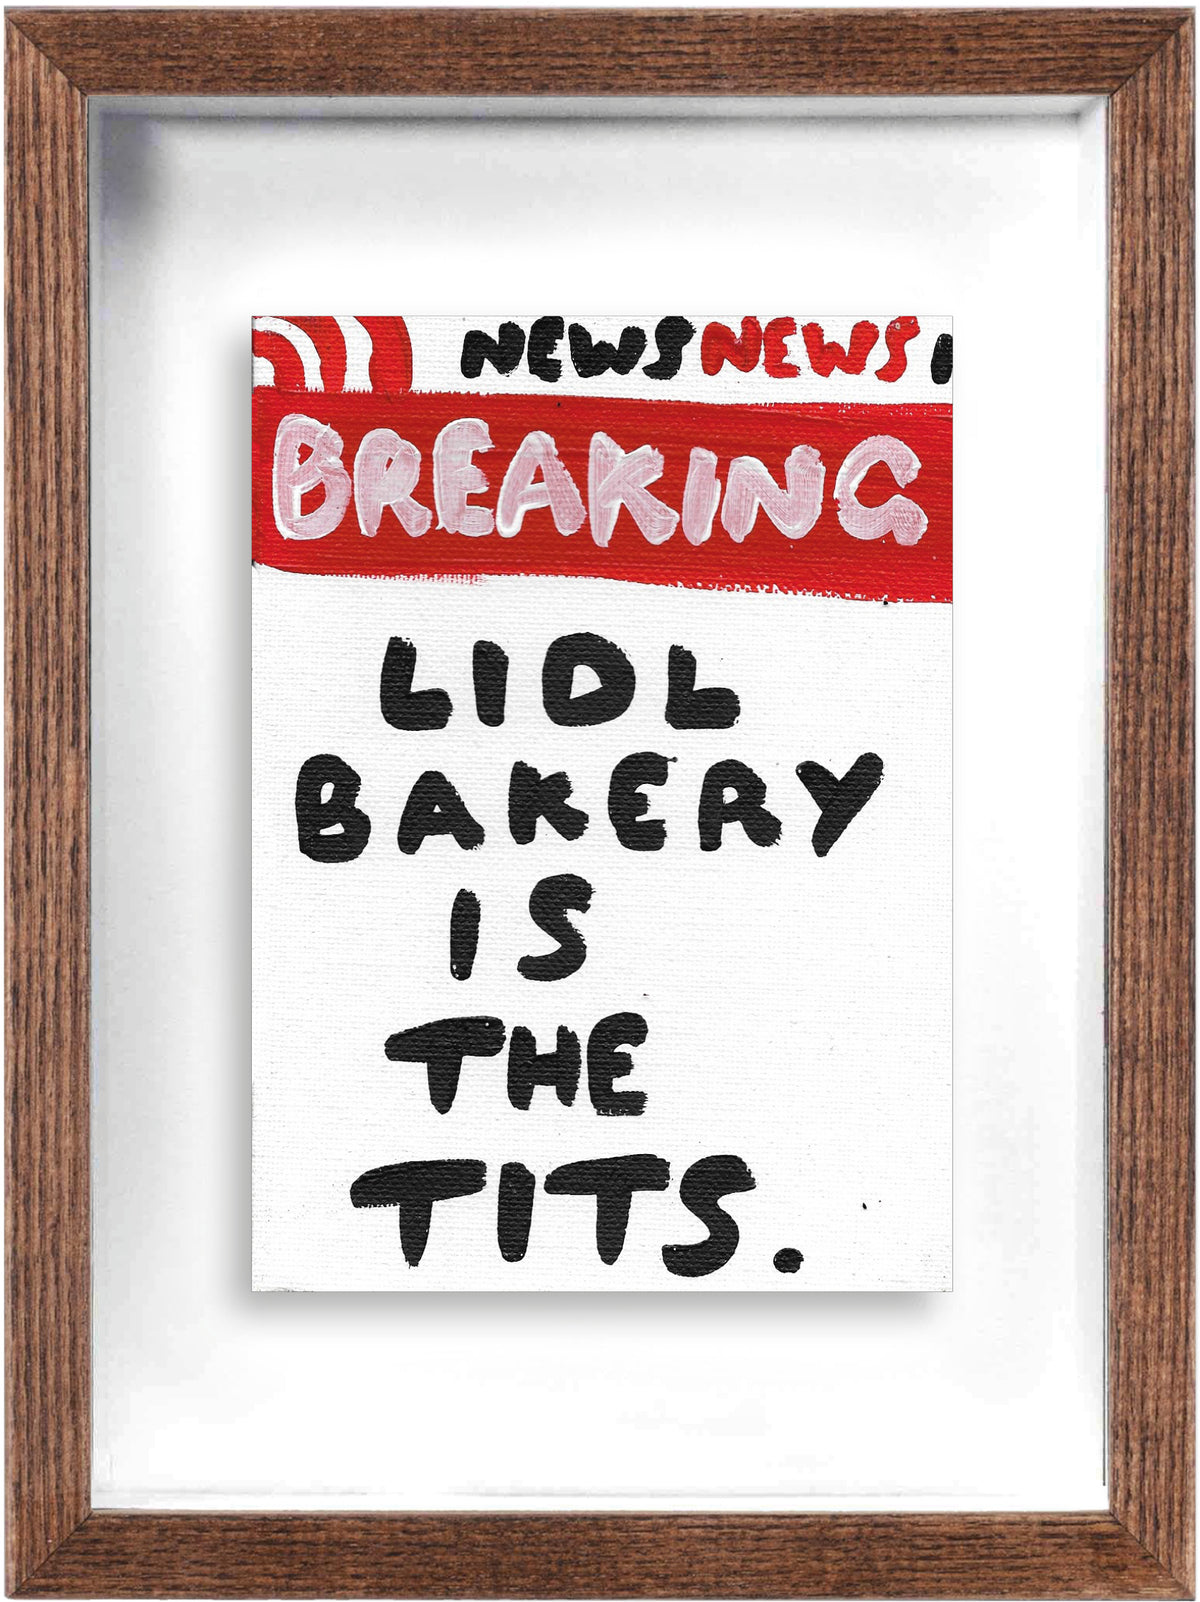 Lidl Bakery Is The Tits (Framed)